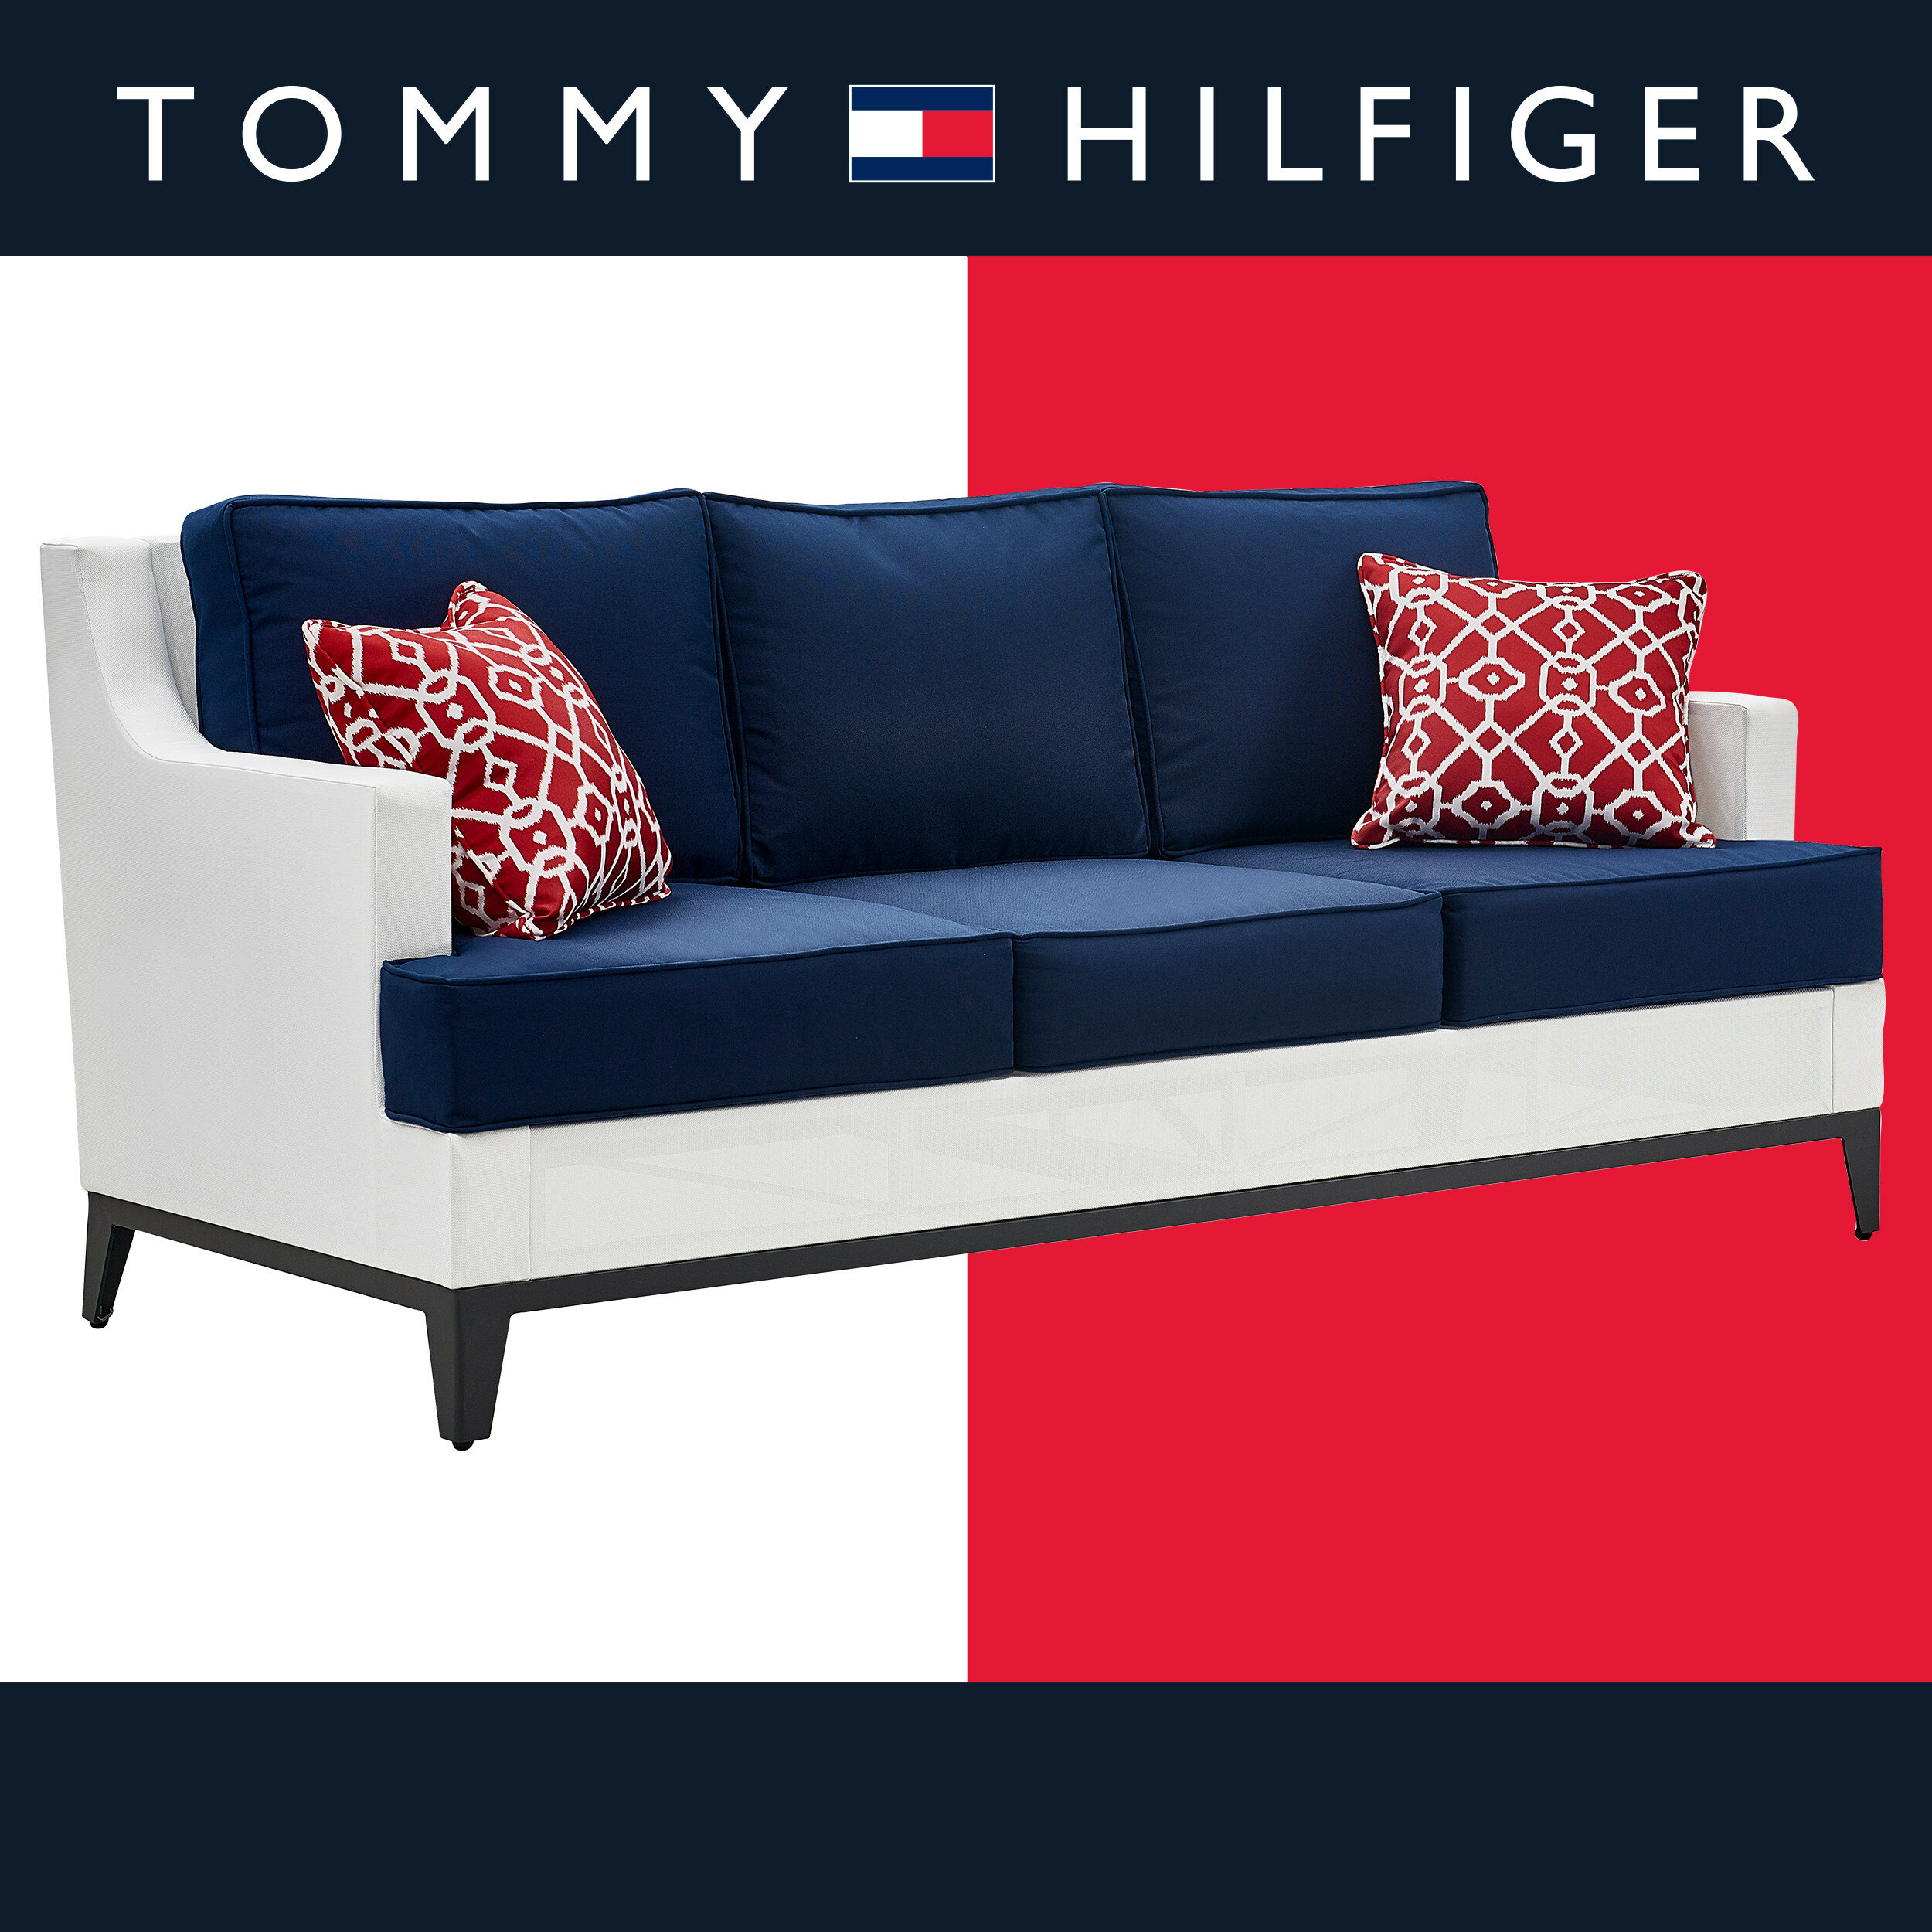 Tommy Hilfiger Hampton Outdoor Mesh Sofa with Cushions, White and Navy Reviews | Wayfair